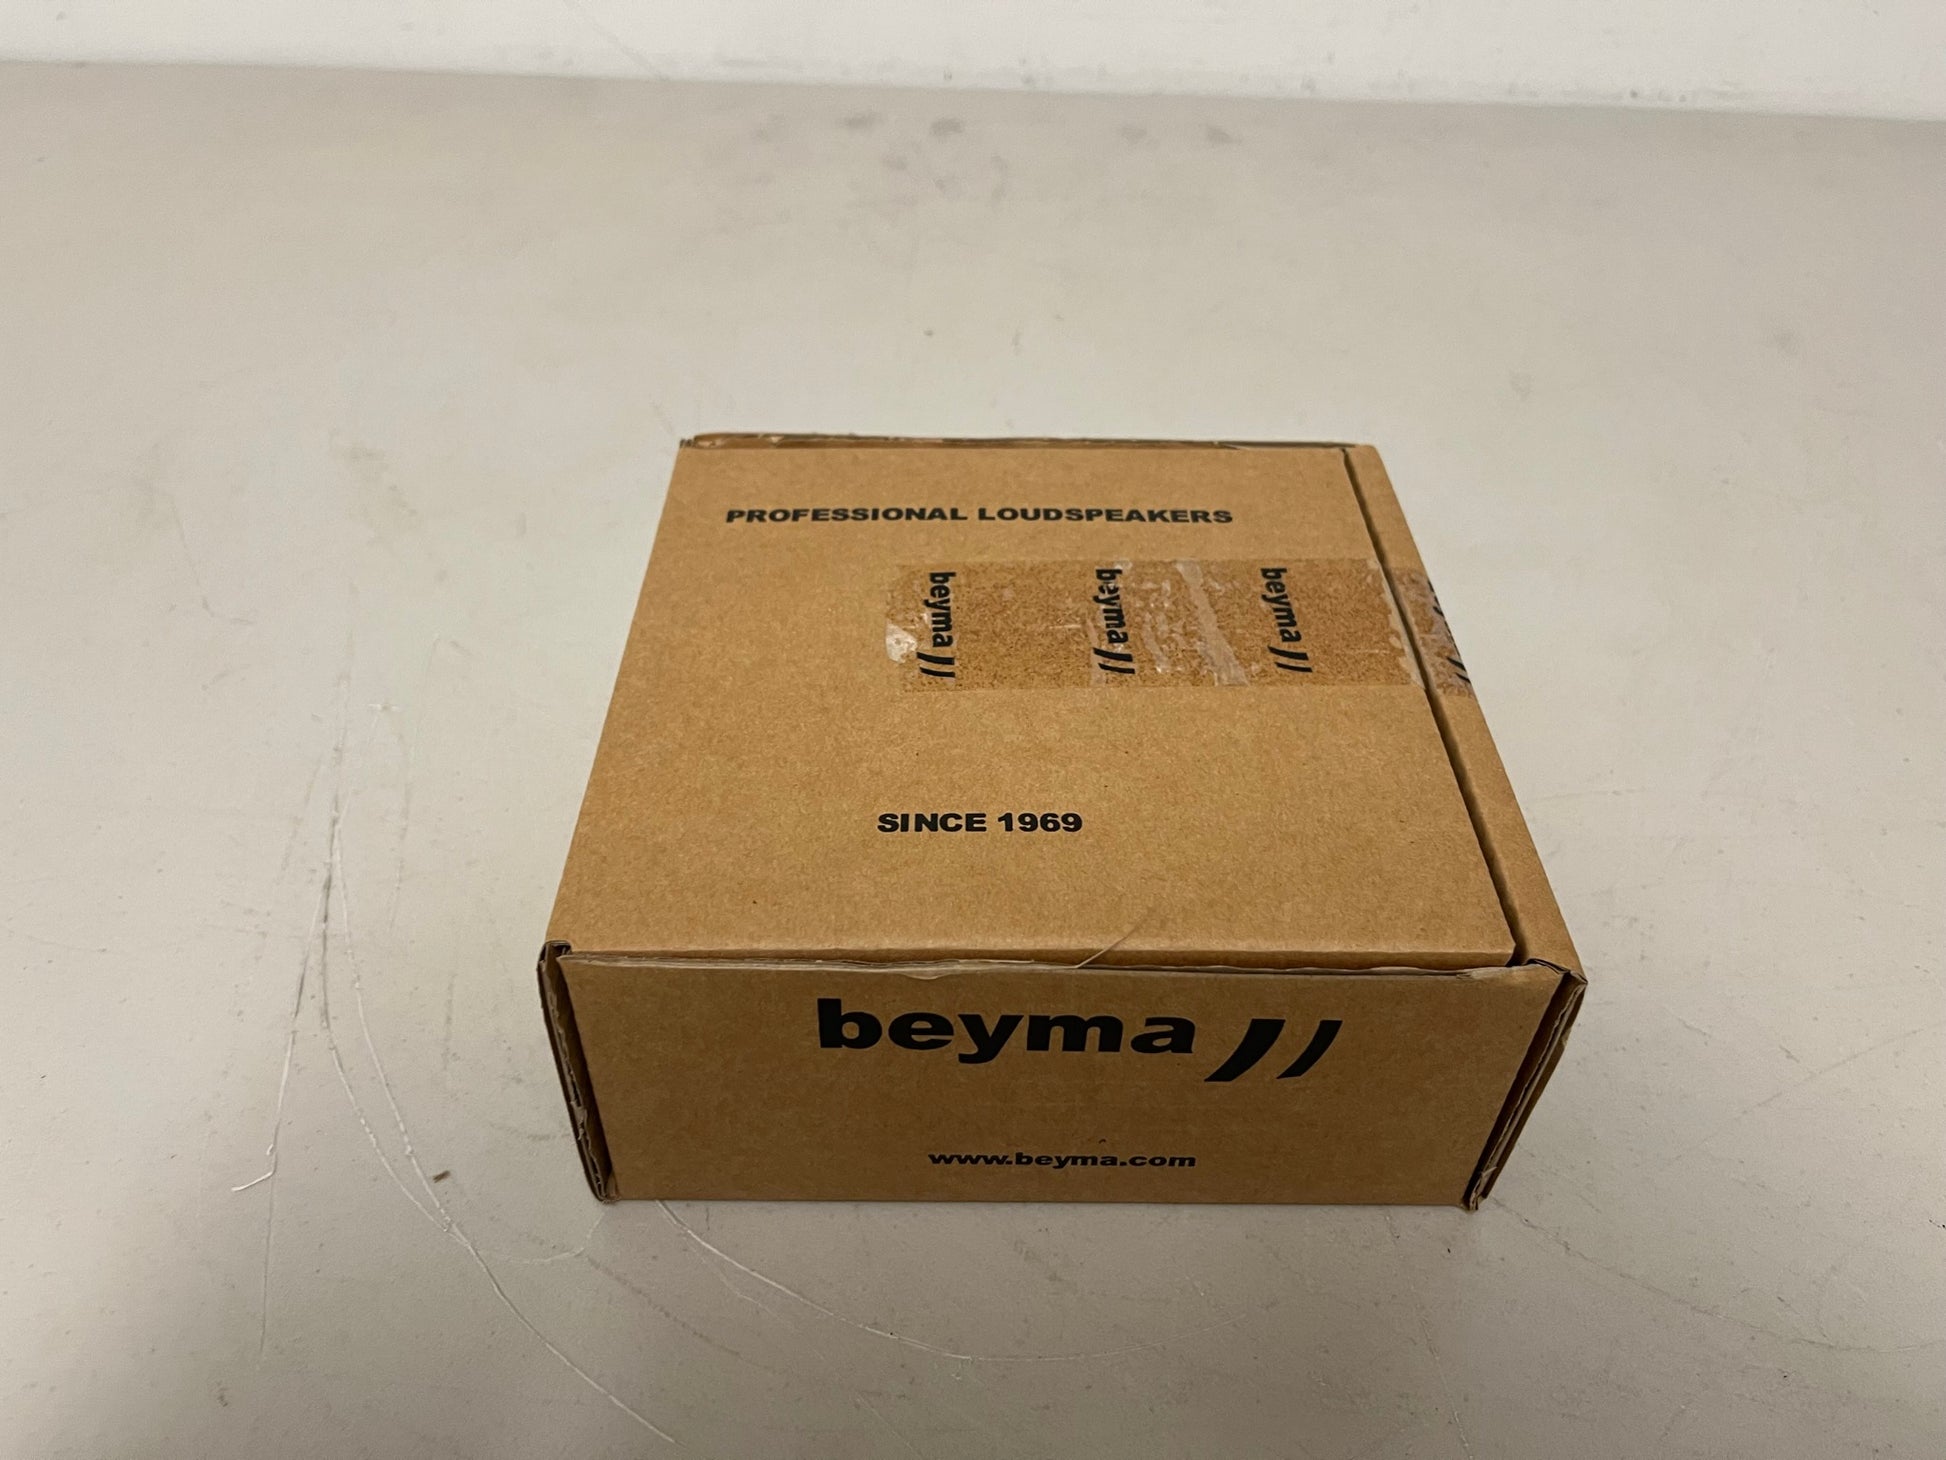 New Beyma 6MI100 6.5" inch 250W Low-Mid Driver for Sale, We Sell Professional Audio Equipment. Audio Systems, Amplifiers, Consoles, Mixers, Electronics, Entertainment, Live Sound